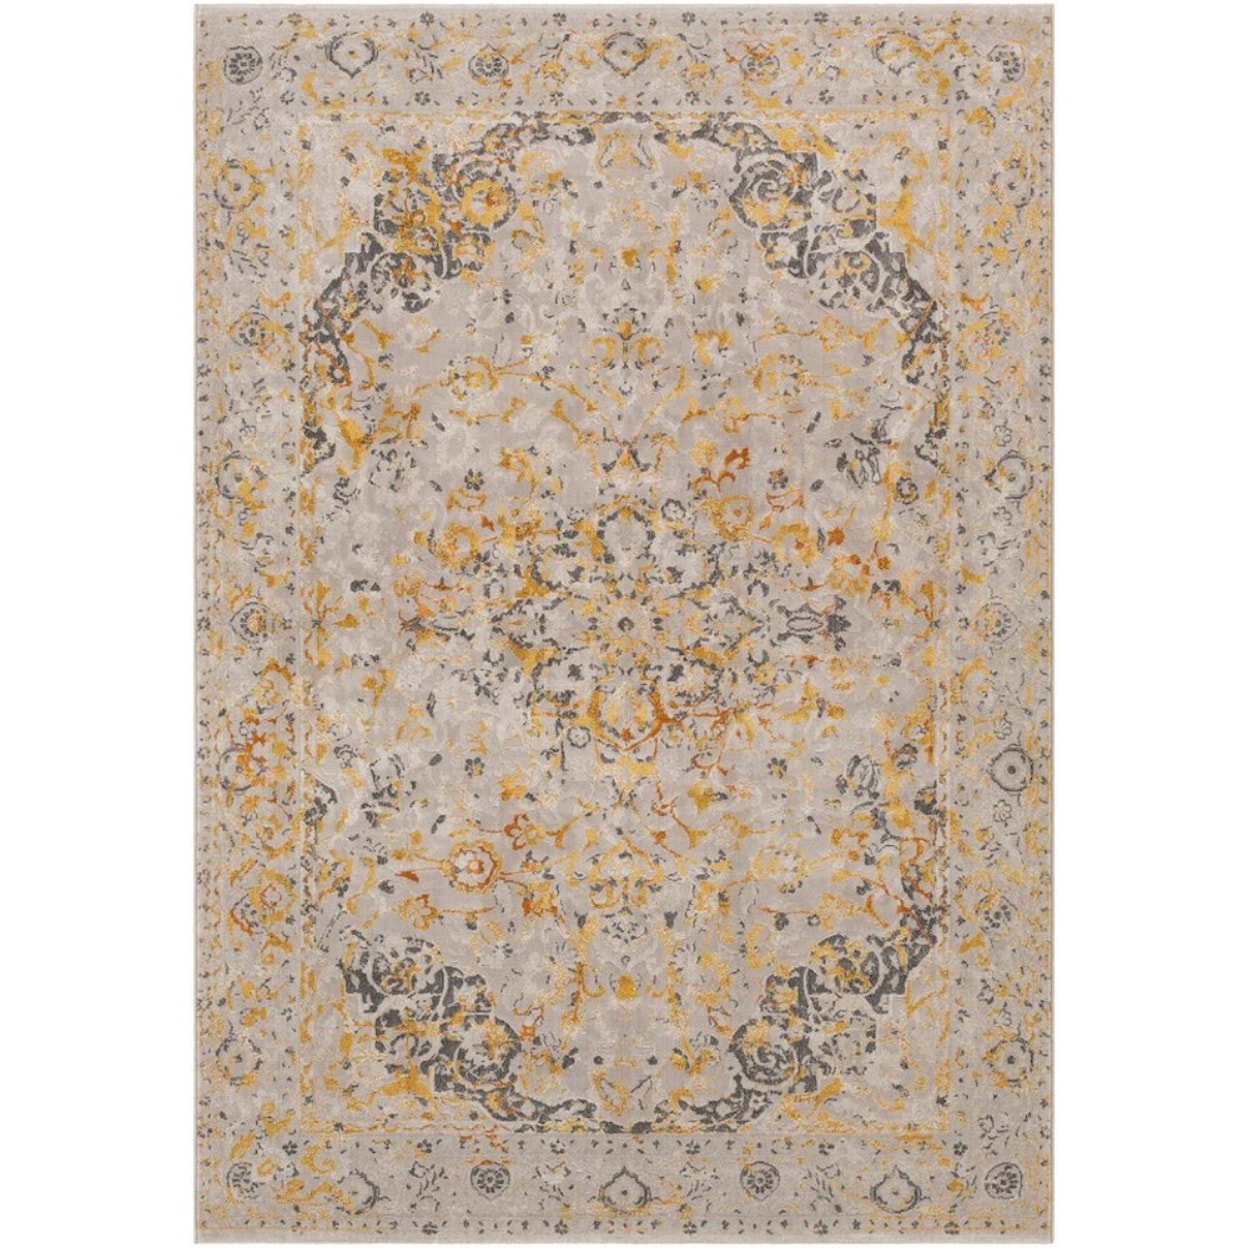 Ruby-Gordon Accents Peachtree 5' x 8' Rug